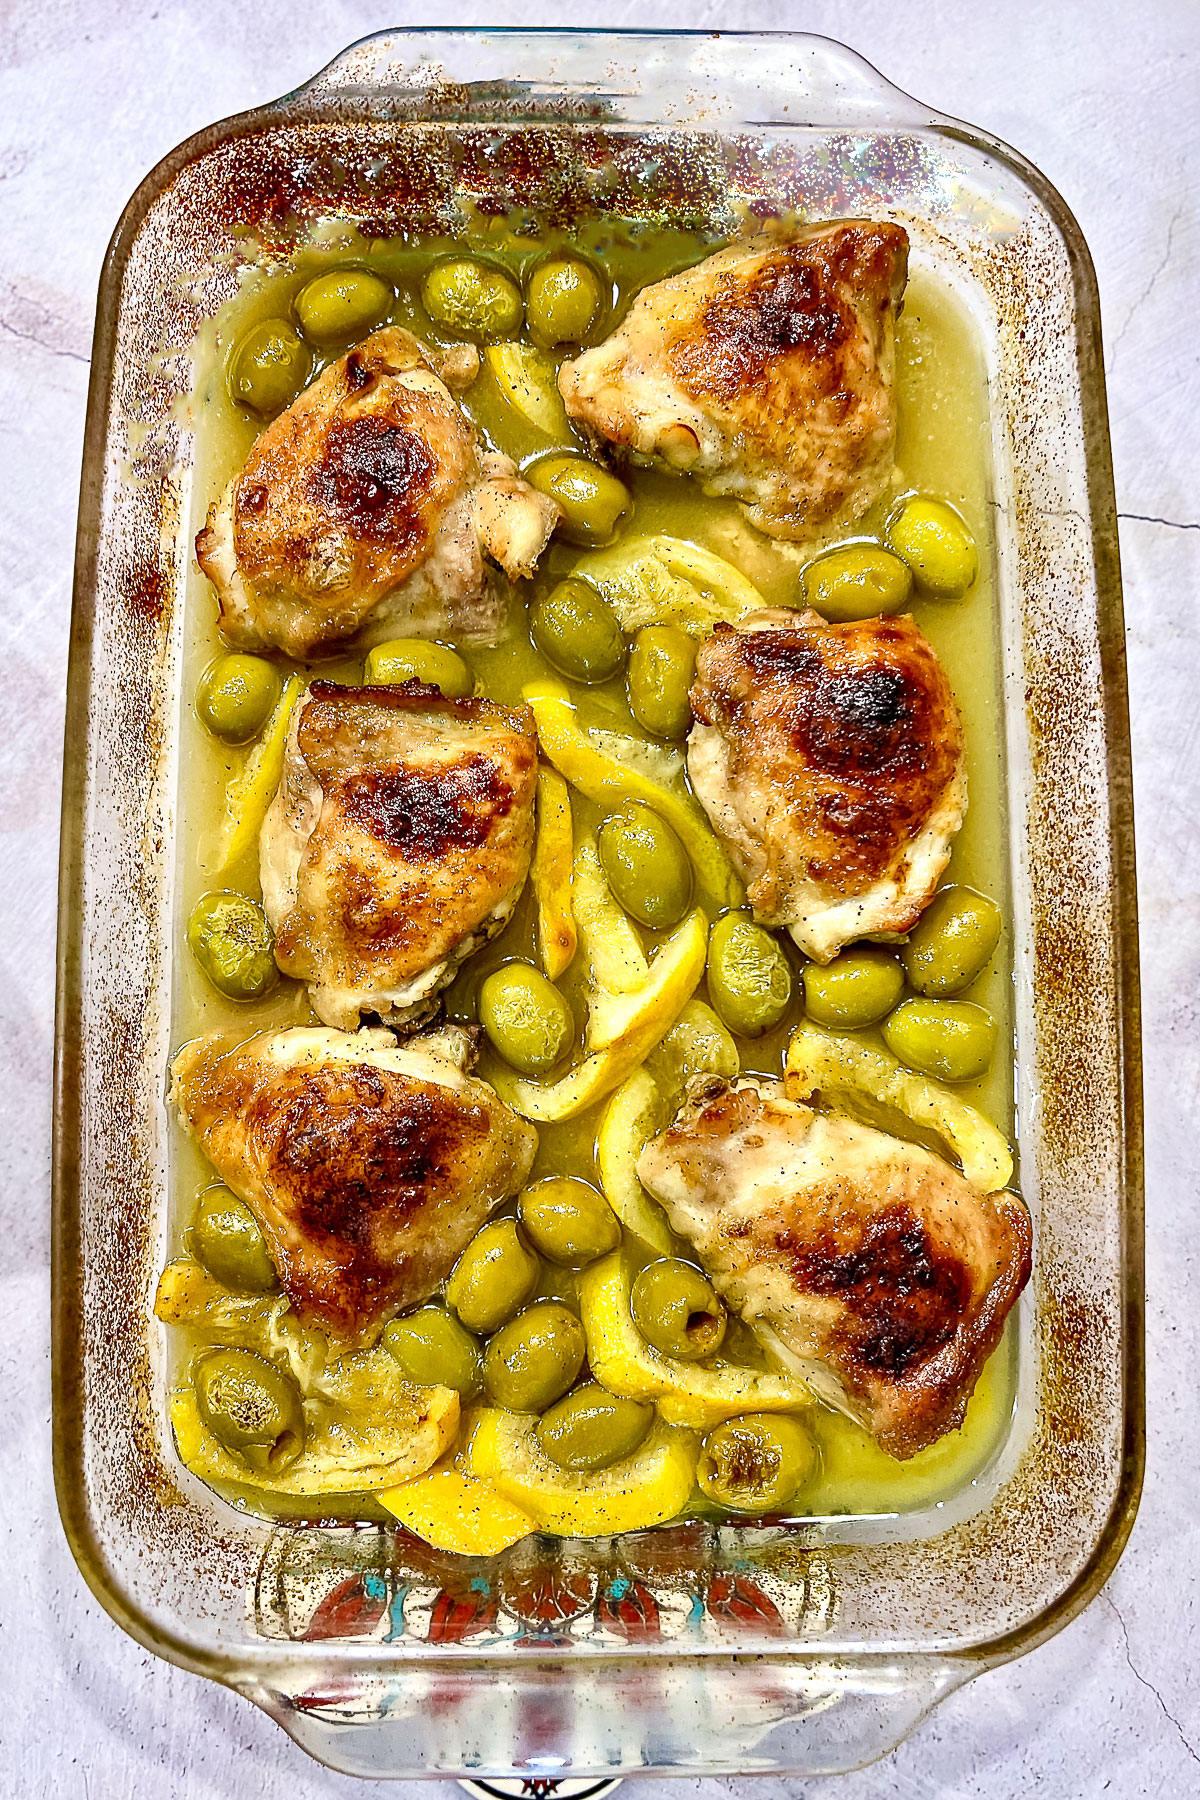 Chicken with olives and lemon on table0